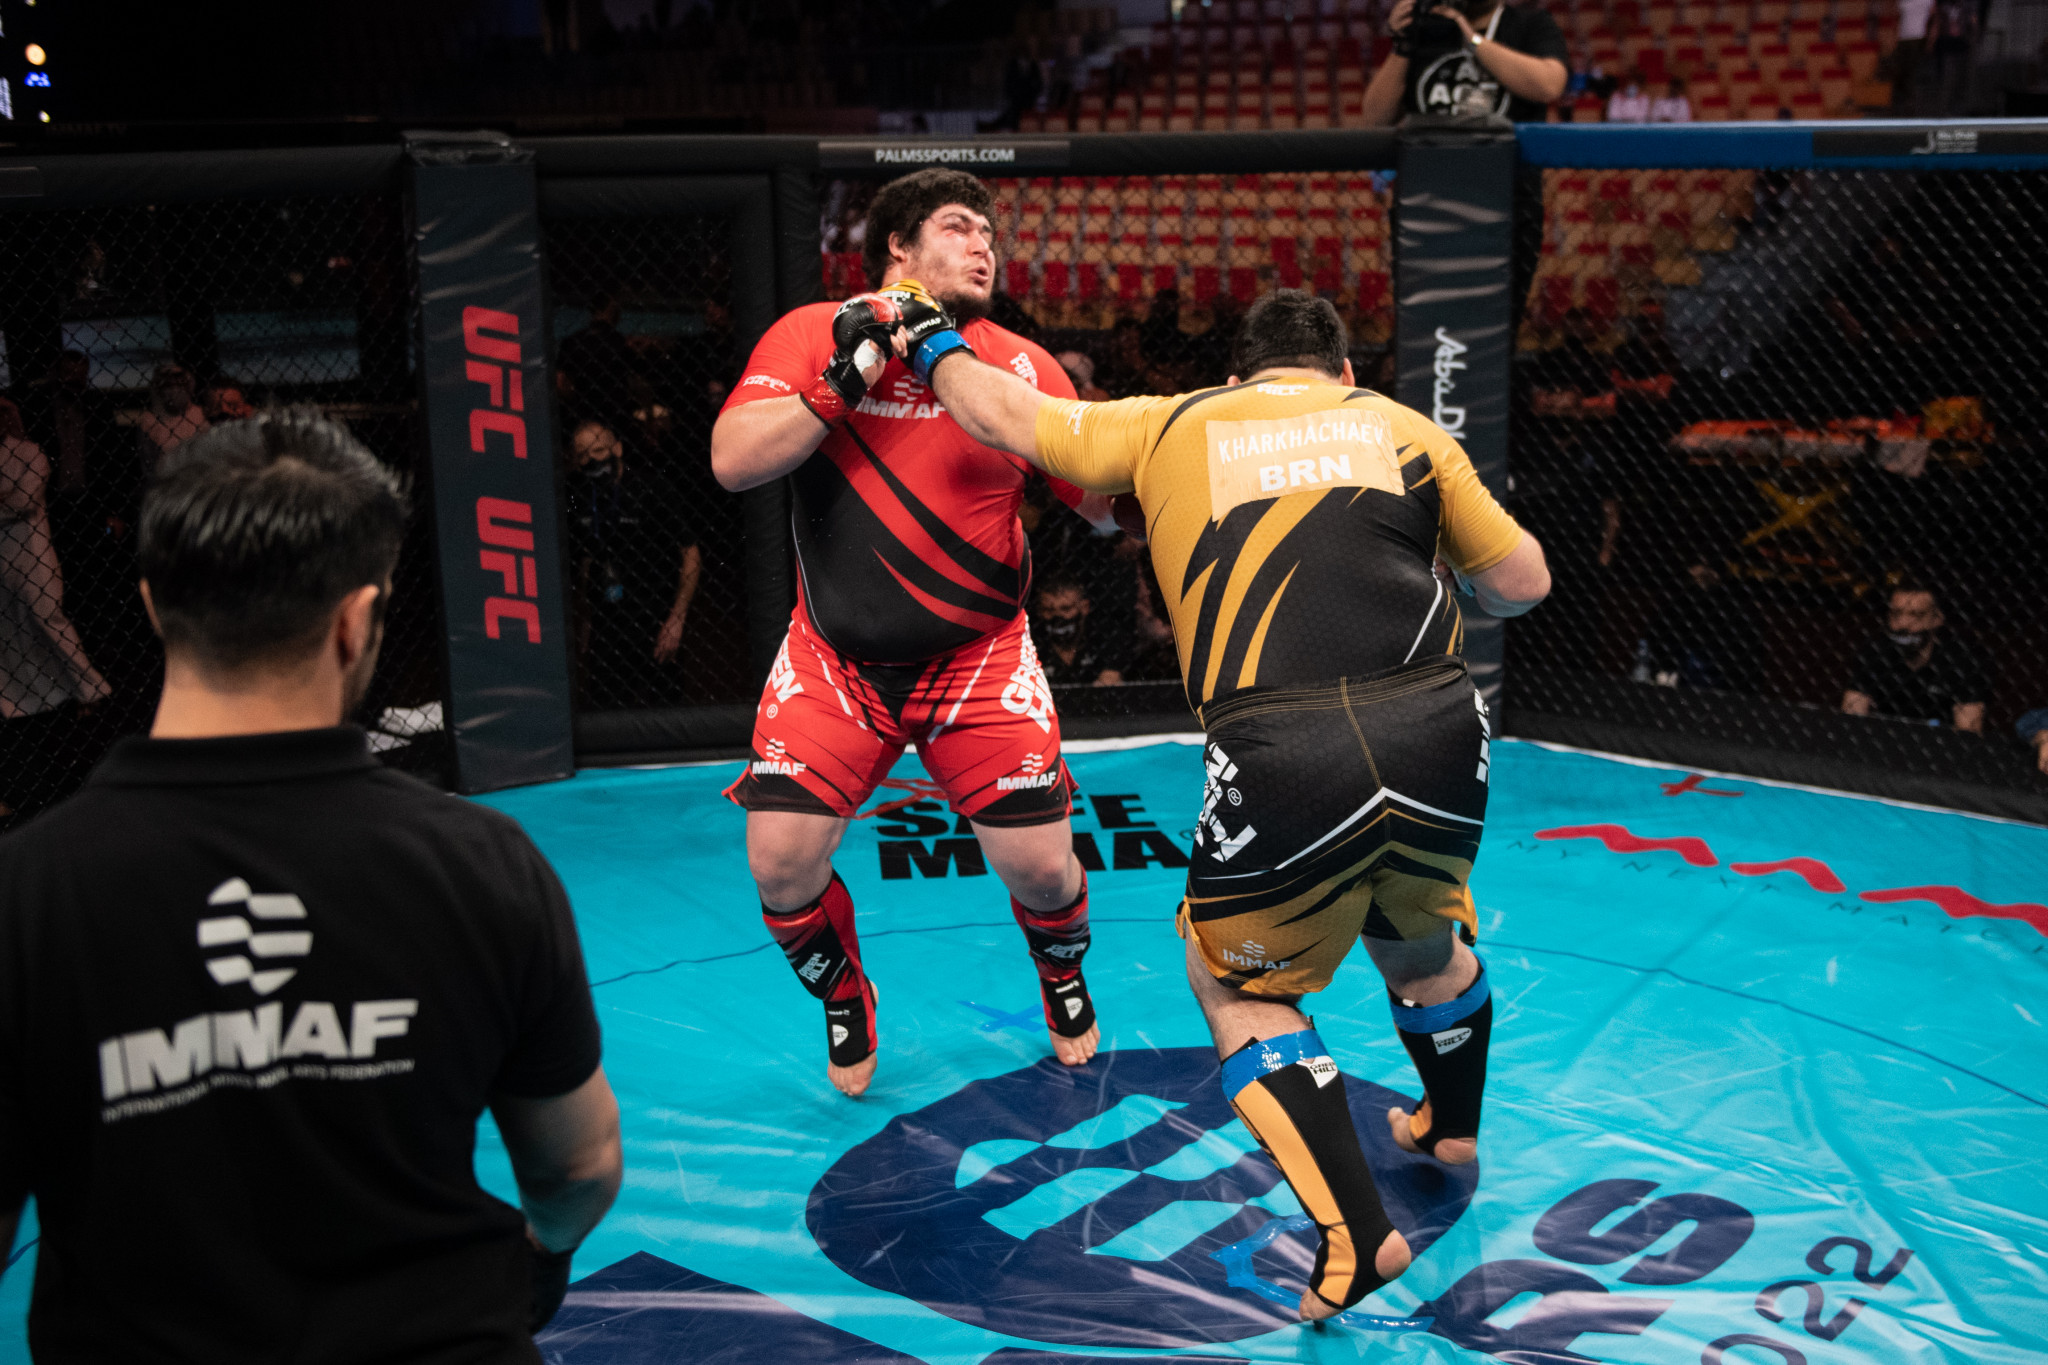 Kharkhachaev powers through in search of third title at IMMAF World Championships